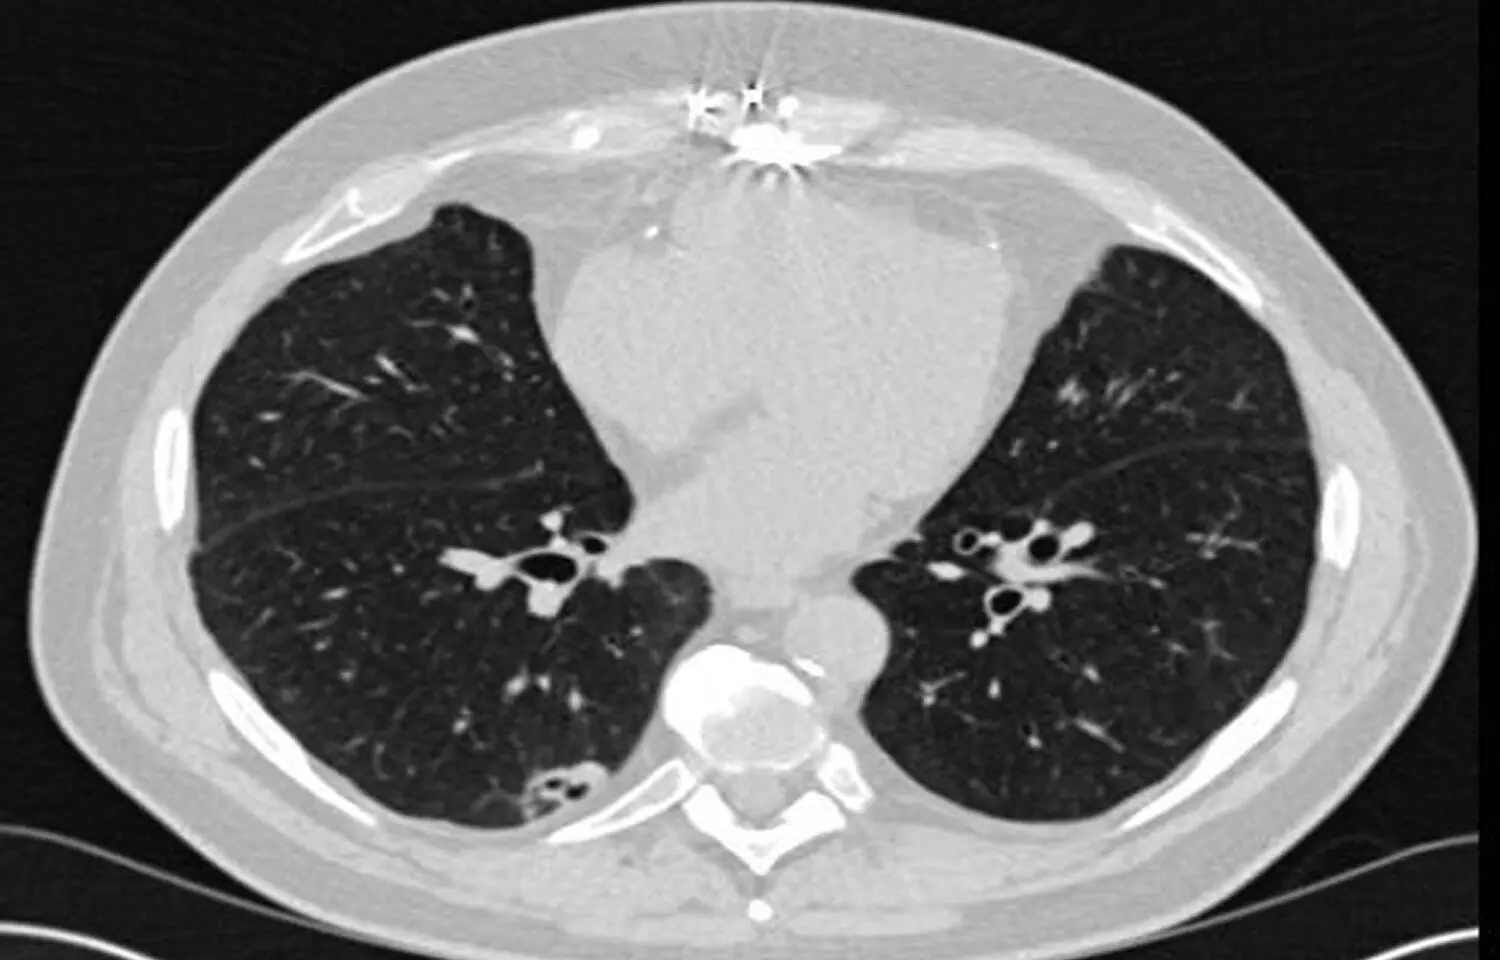 Lung CT scans can also be used for identifying osteoporosis, finds study